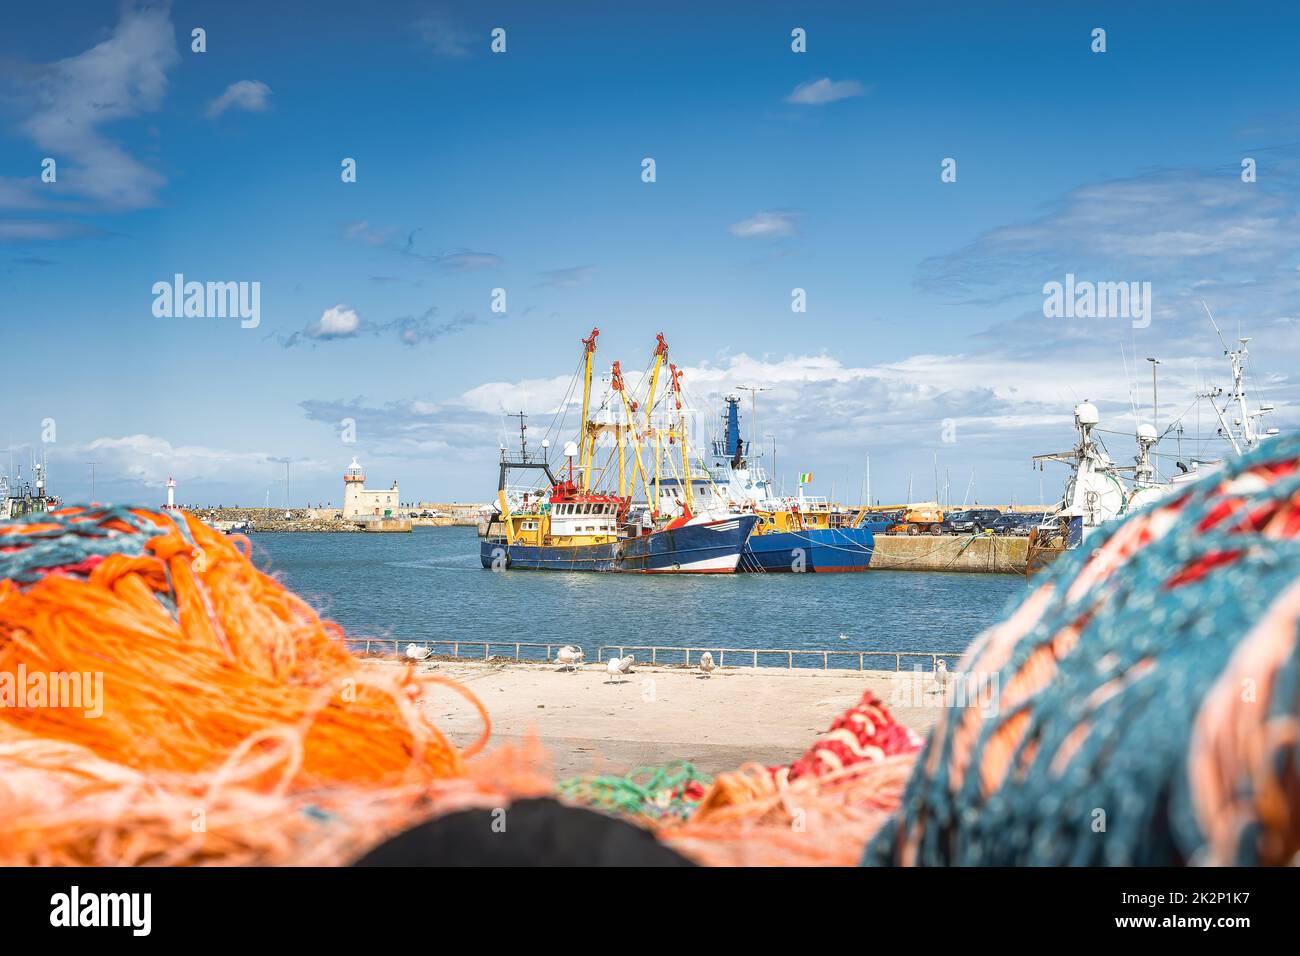 Large fishing boats moored in Howth harbour seen through blurred nets Stock Photo